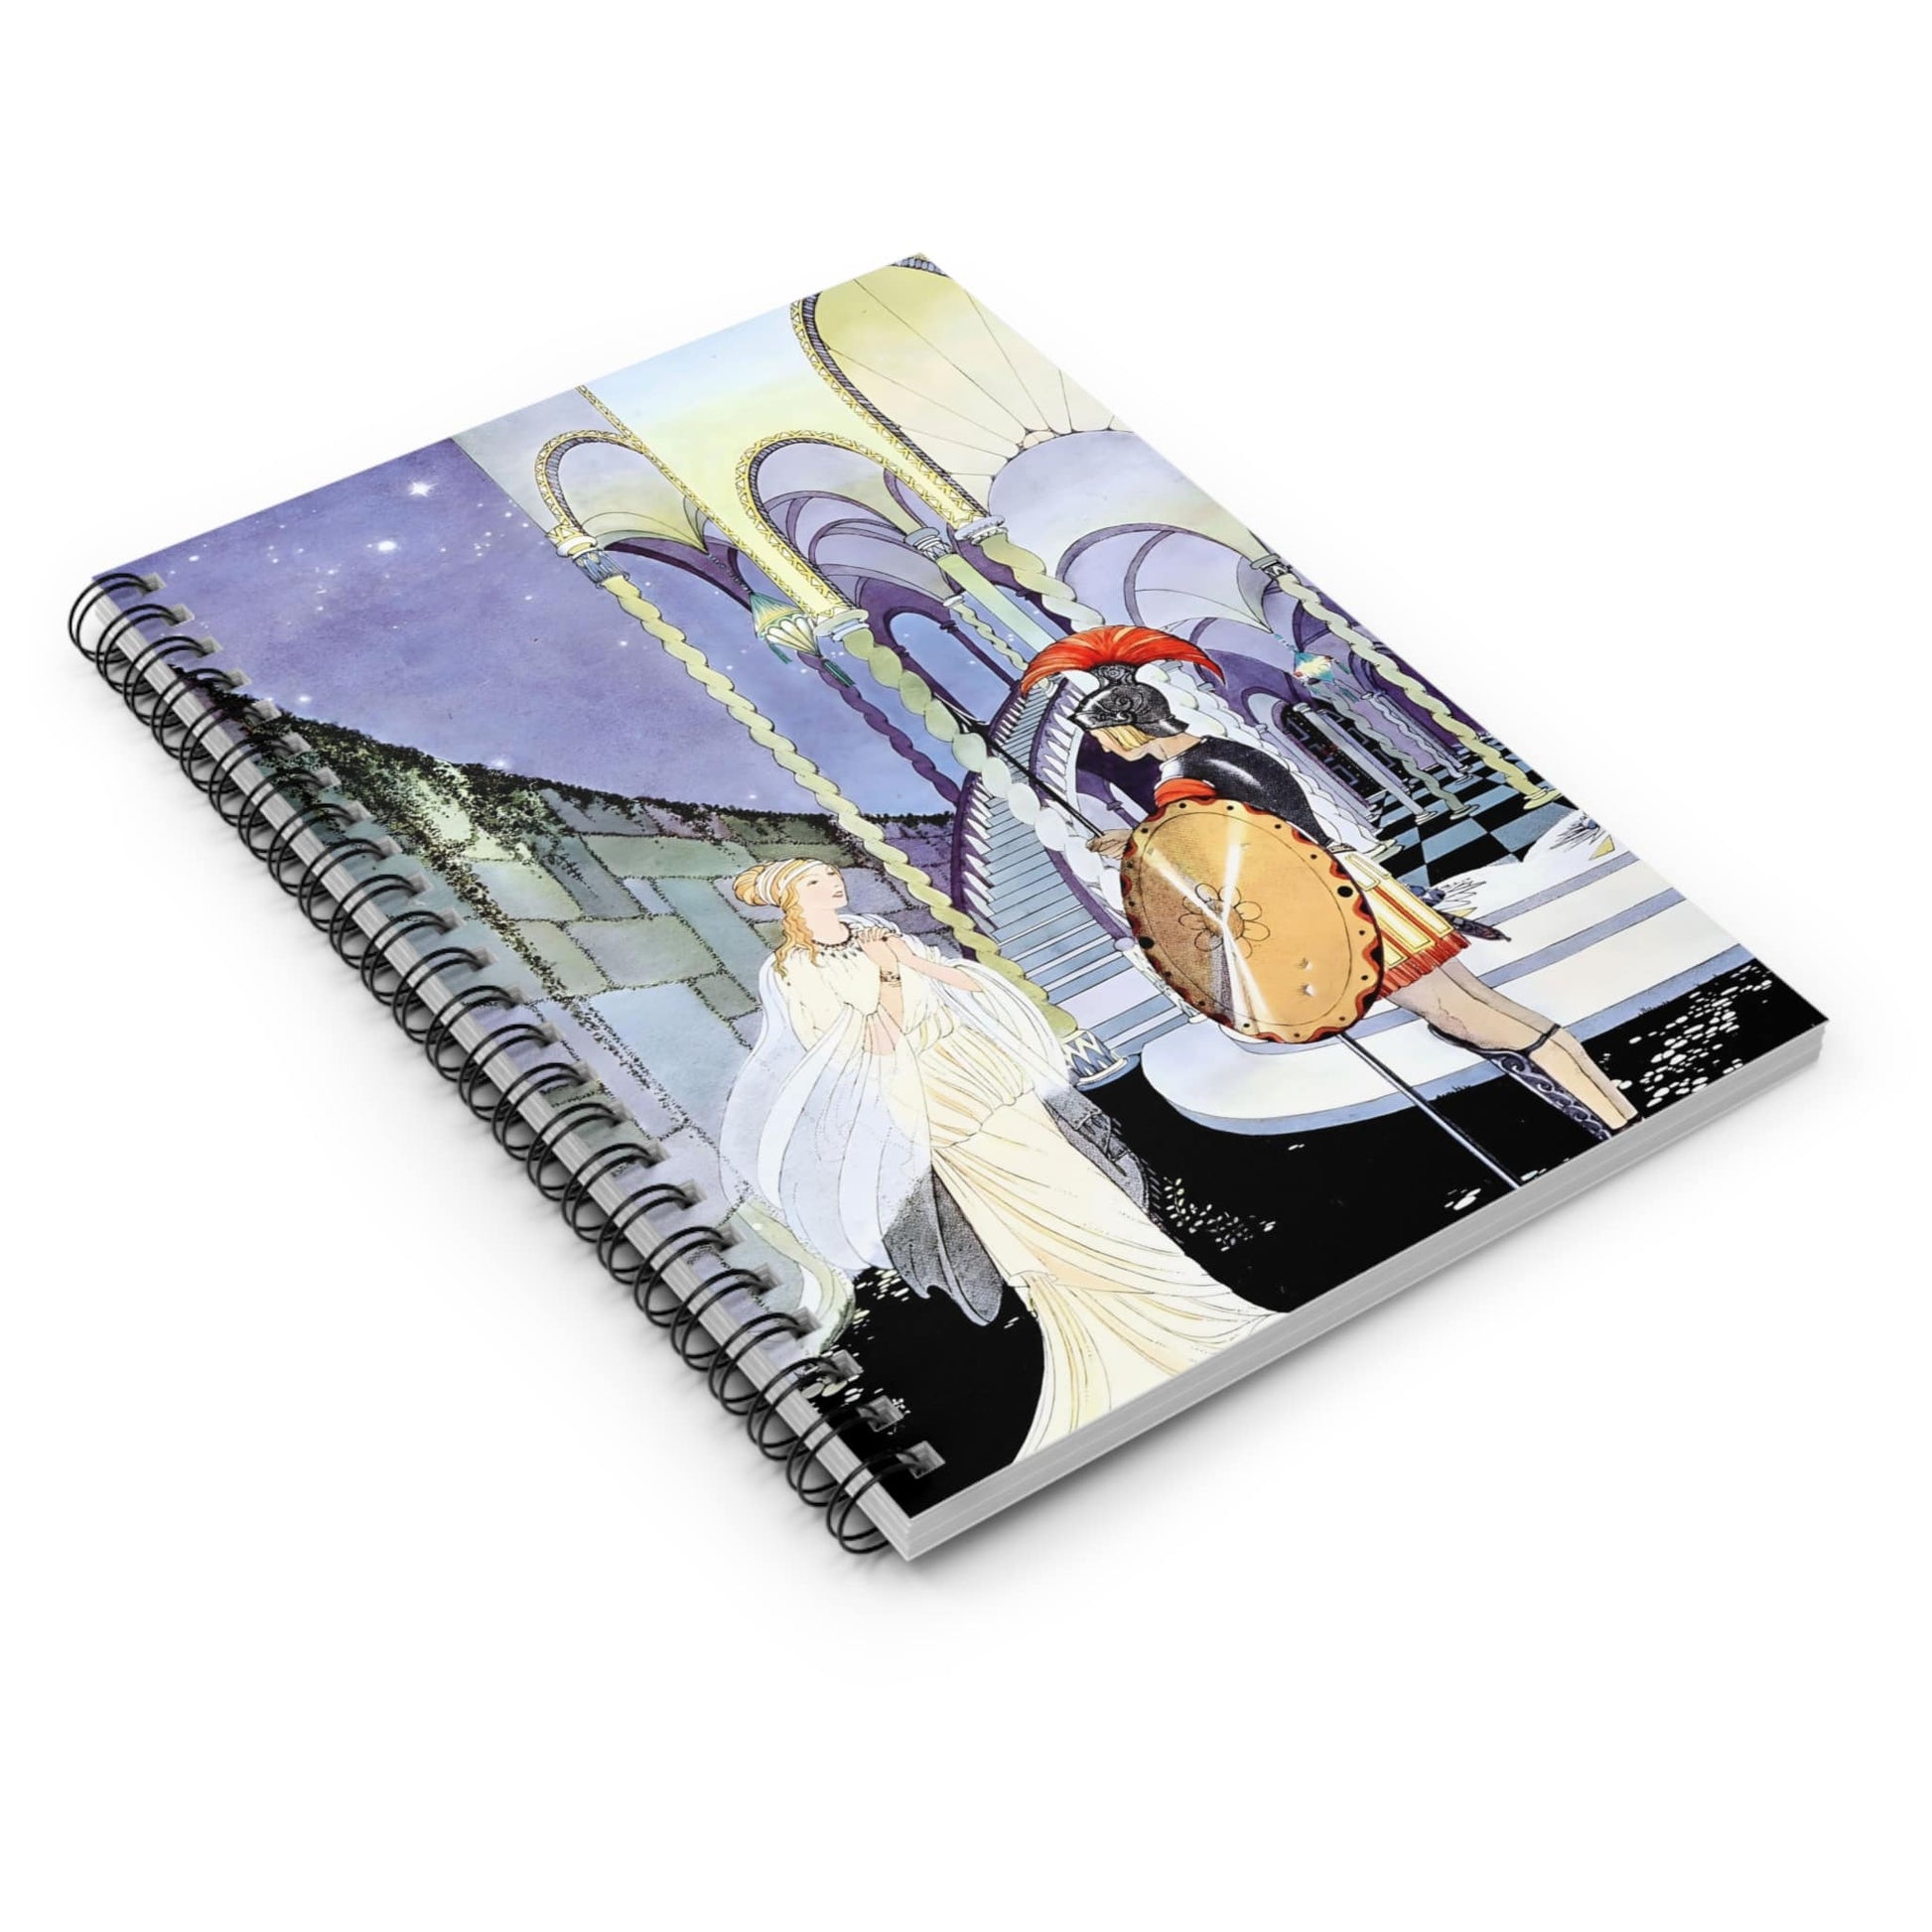 Princess and the Knight Spiral Notebook Laying Flat on White Surface